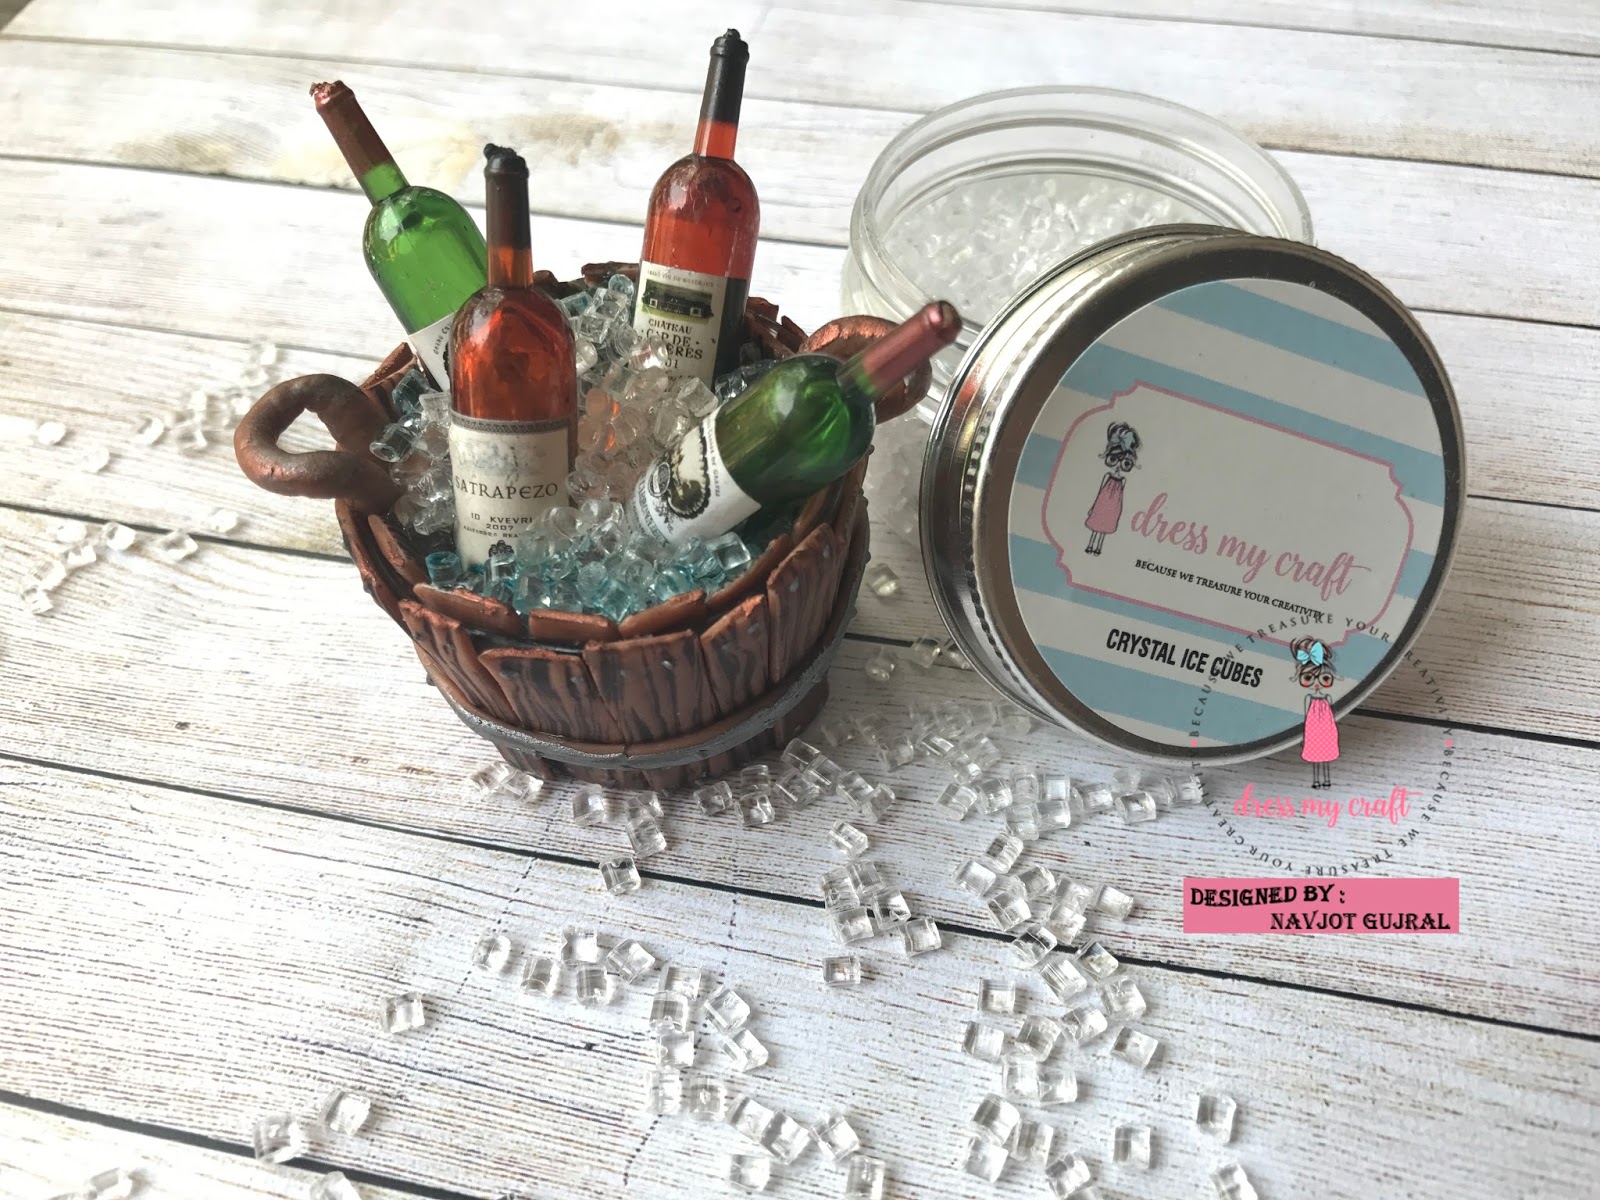 Dress My Craft: FUN WITH- Sparkling Dust, Crystal Ice Cubes ...